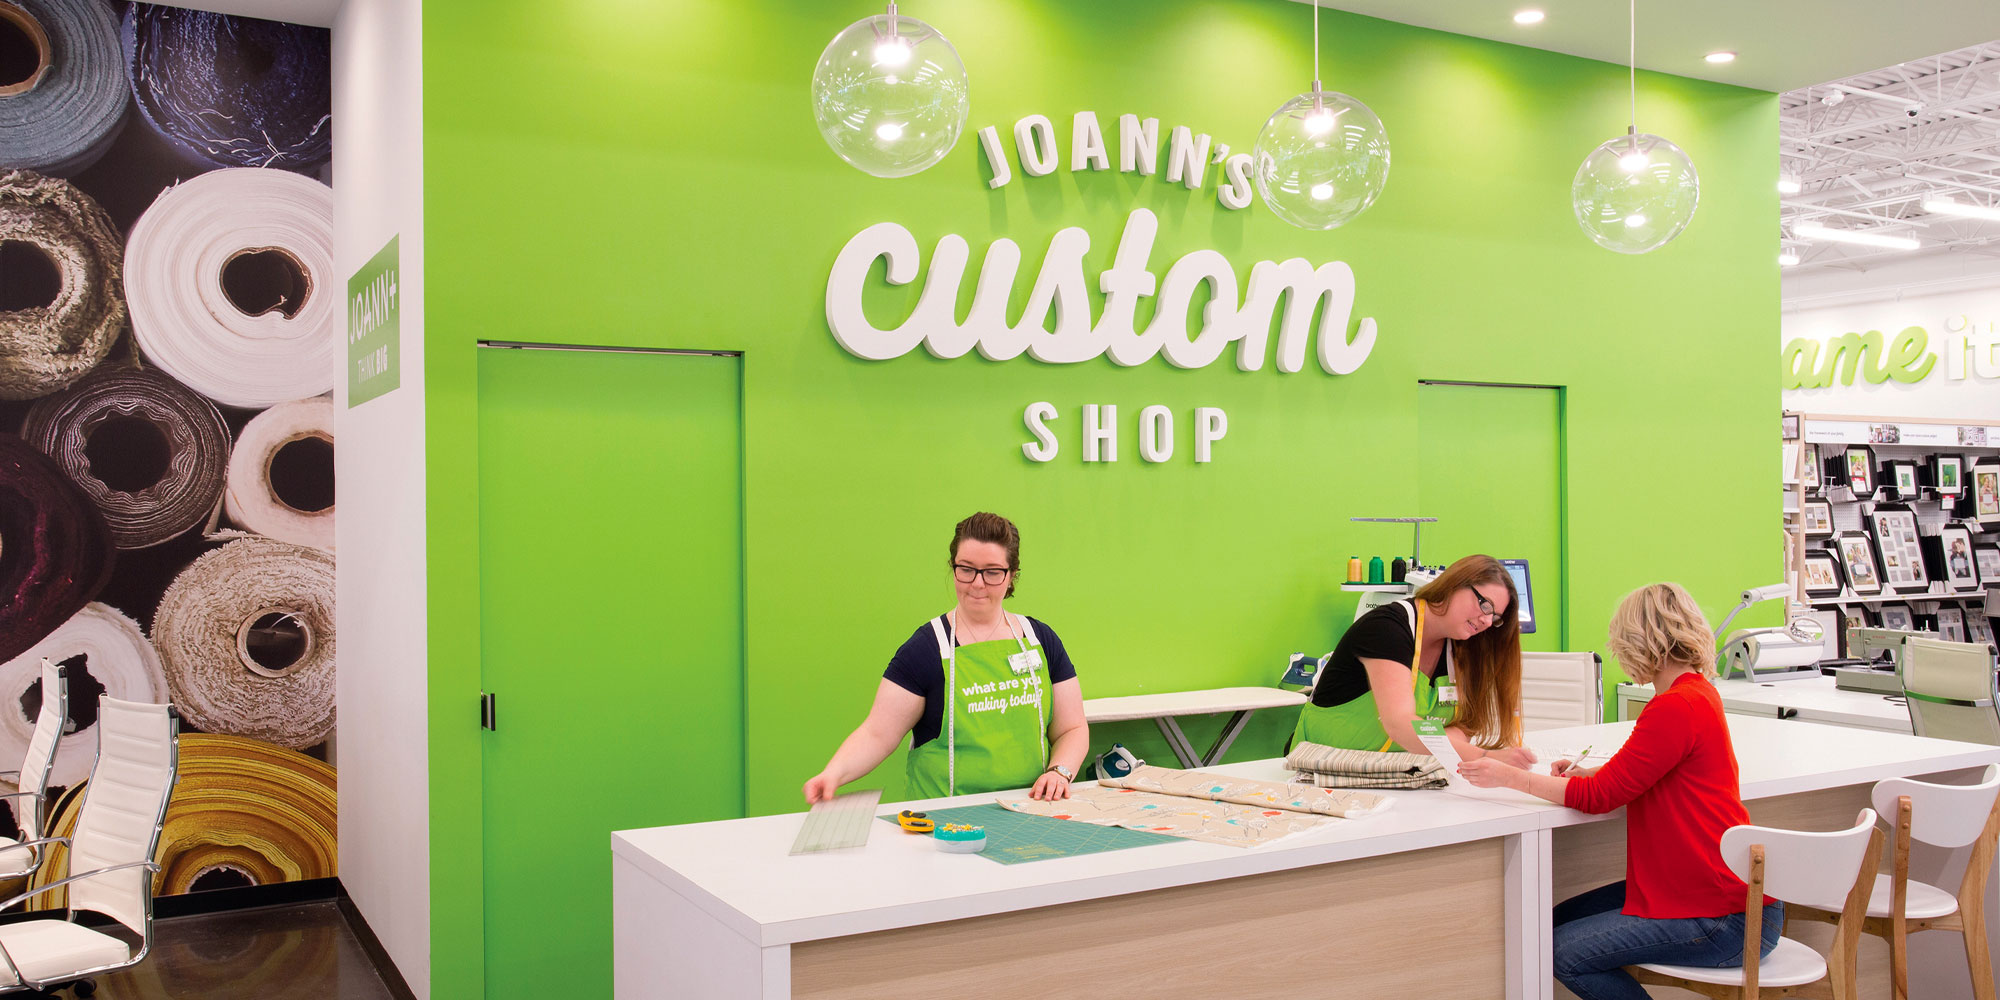 joann-fabrics-is-offering-free-classes-supplies-to-make-your-own